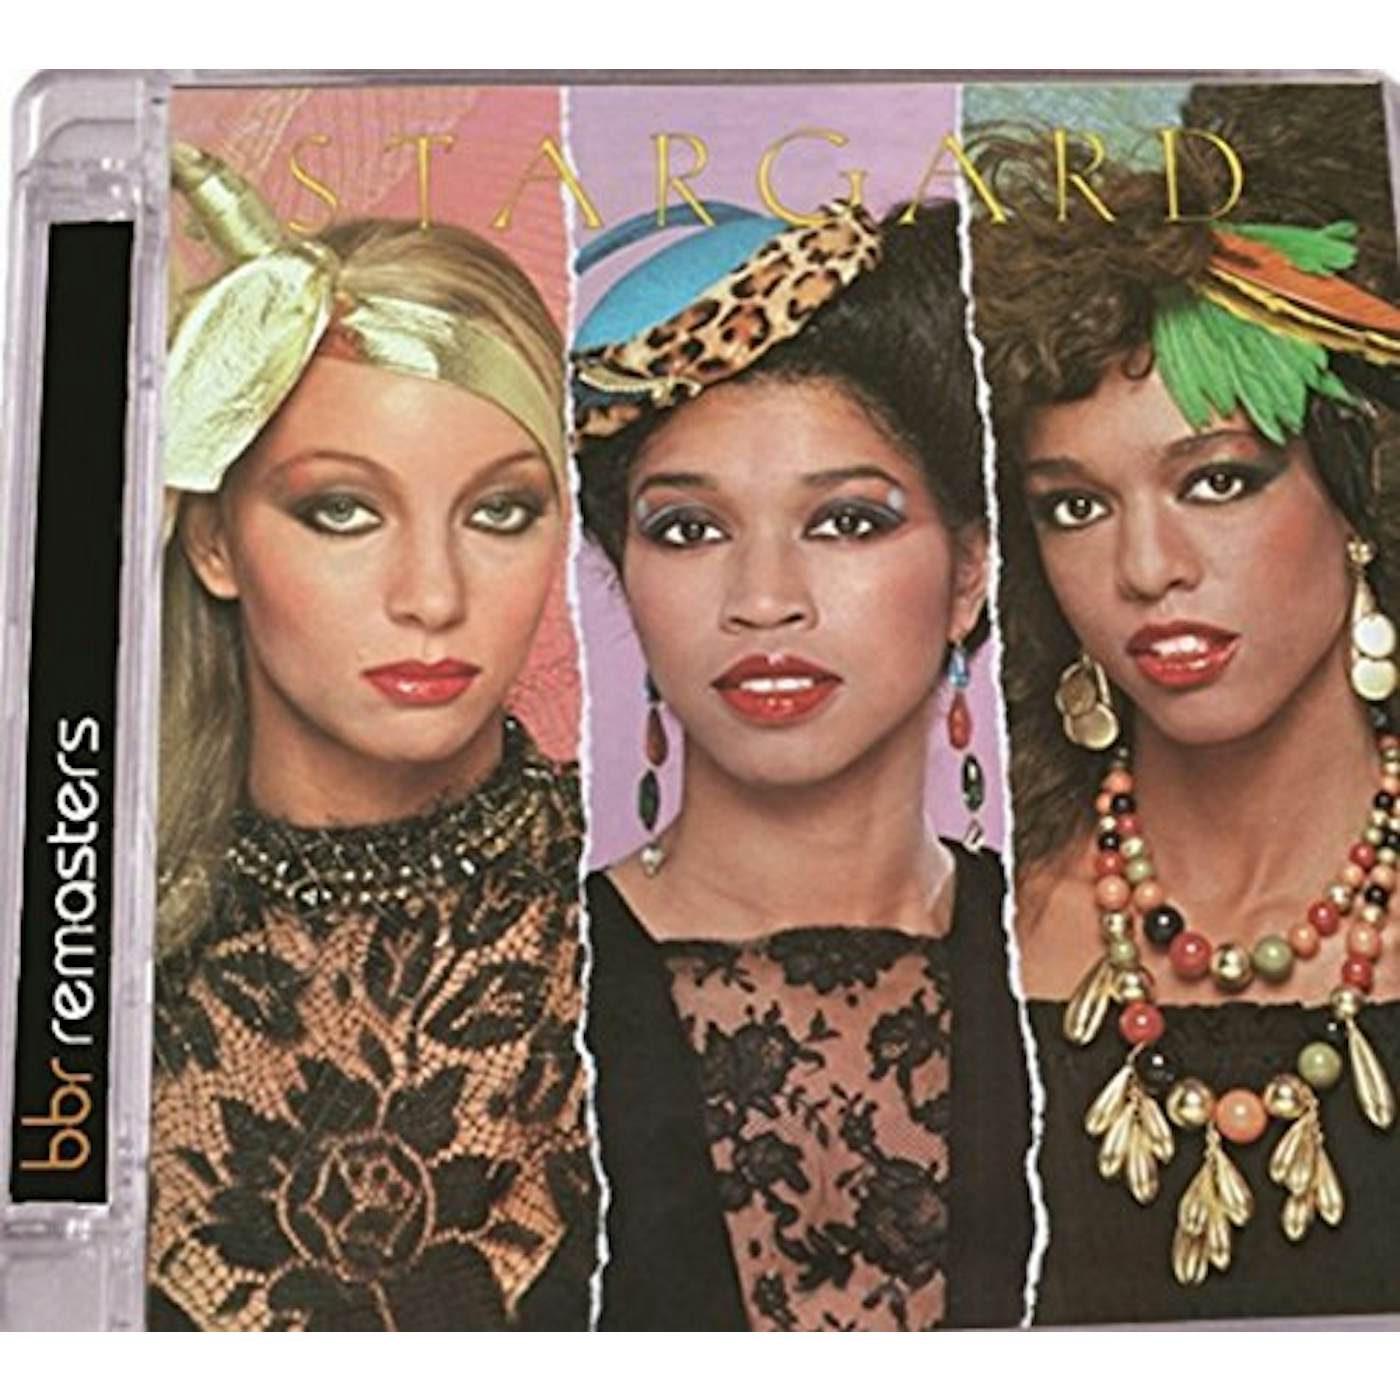 Stargard CHANGING OF THE GARD: EXPANDED EDITION CD